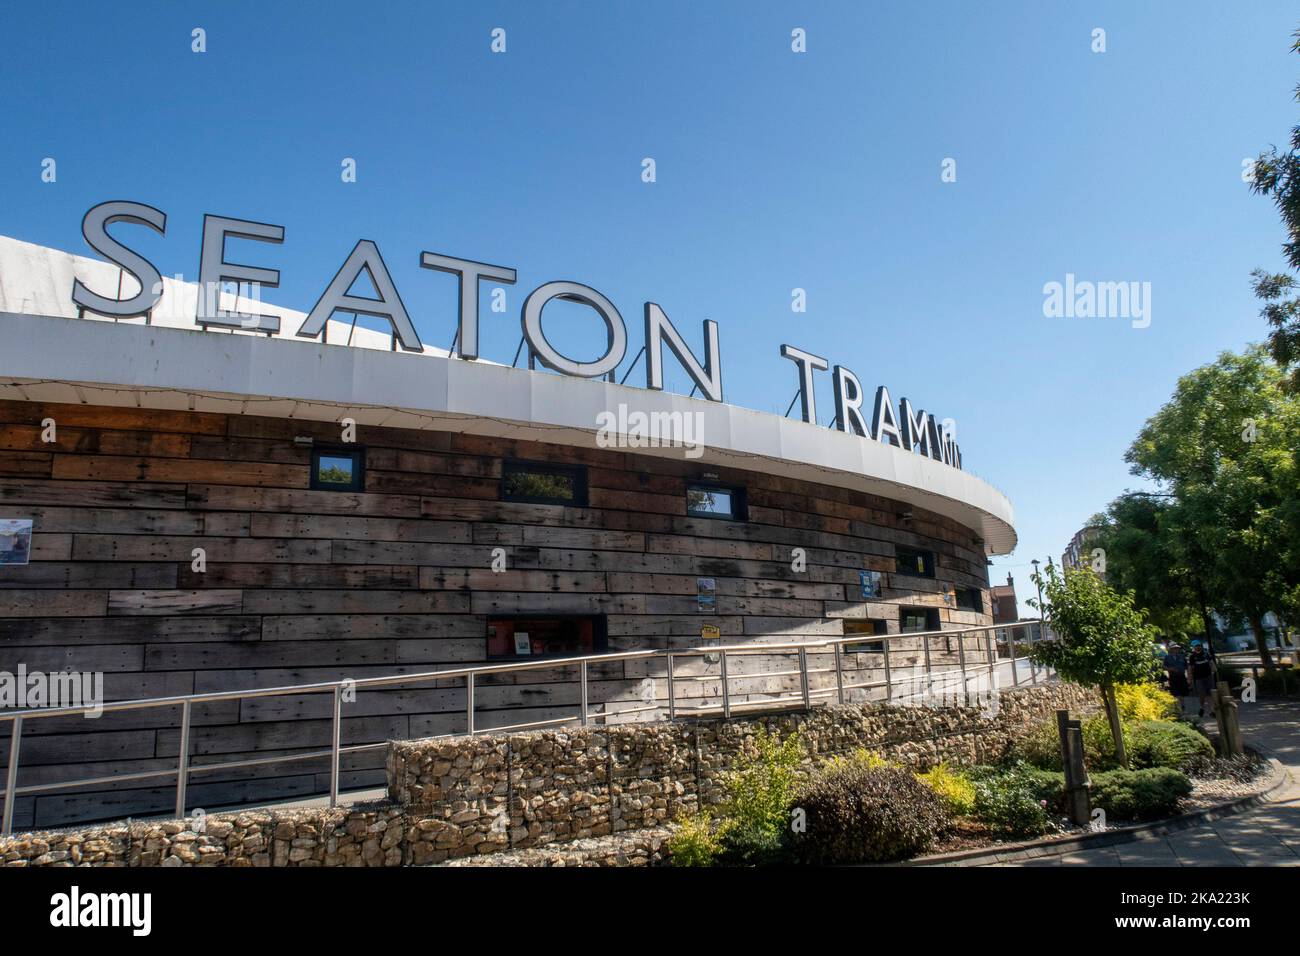 Seaton tramway sign and exterior, an East Devon tourist attraction which runs between Seaton and Colyton. Stock Photo